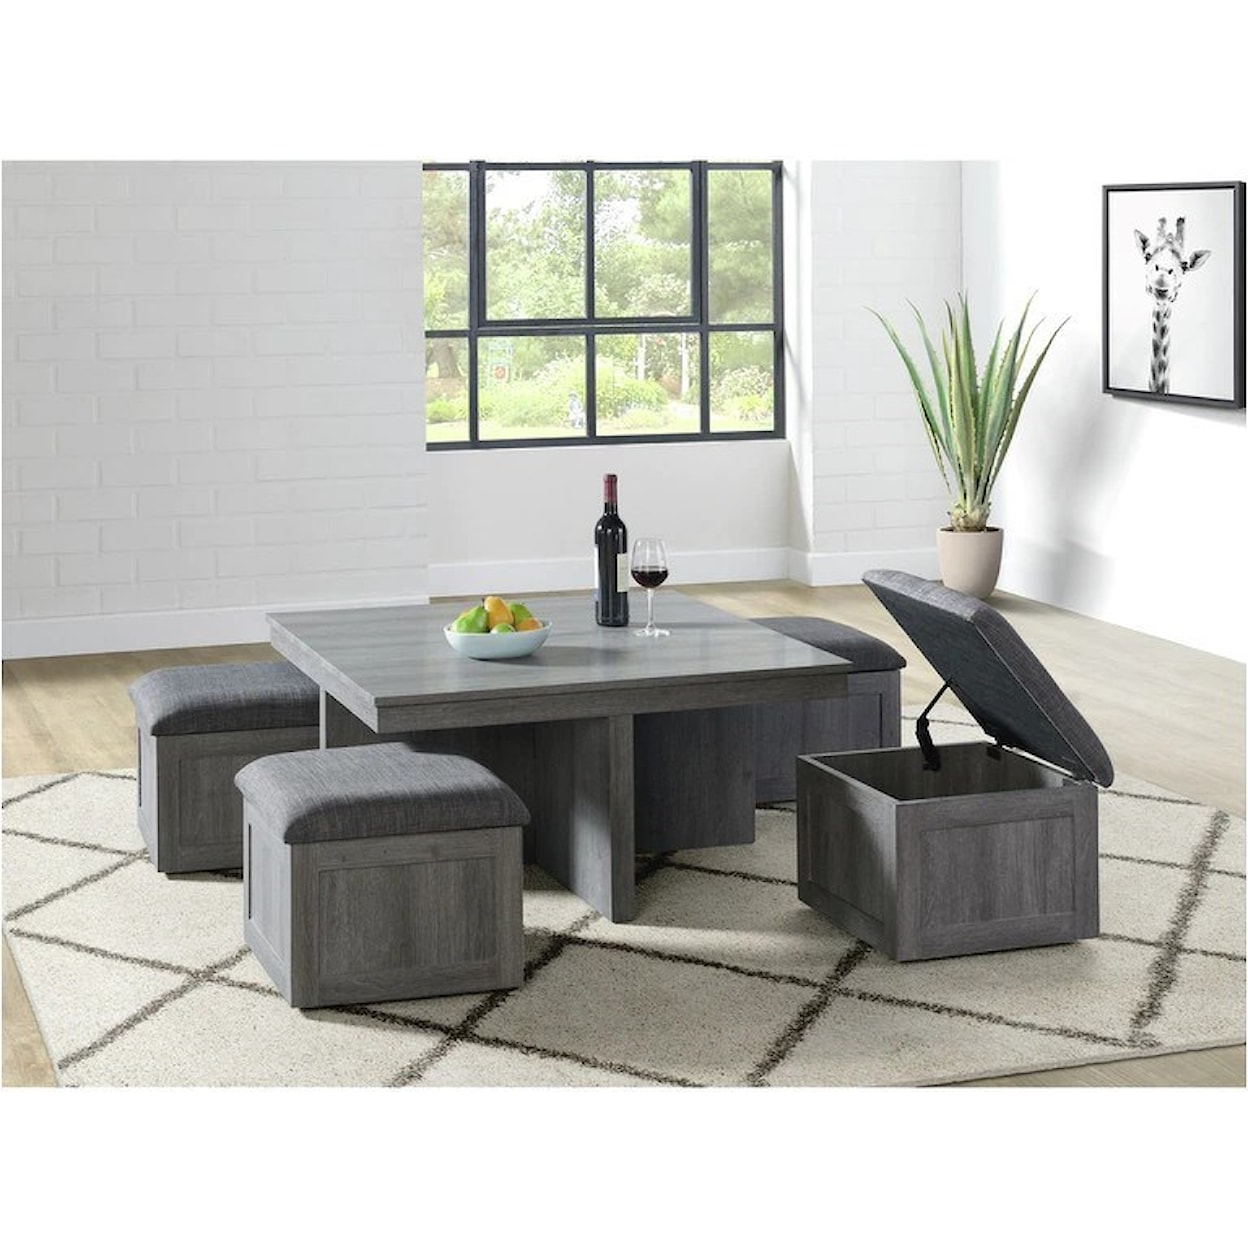 Elements Uster Coffee Table with Nesting Stools